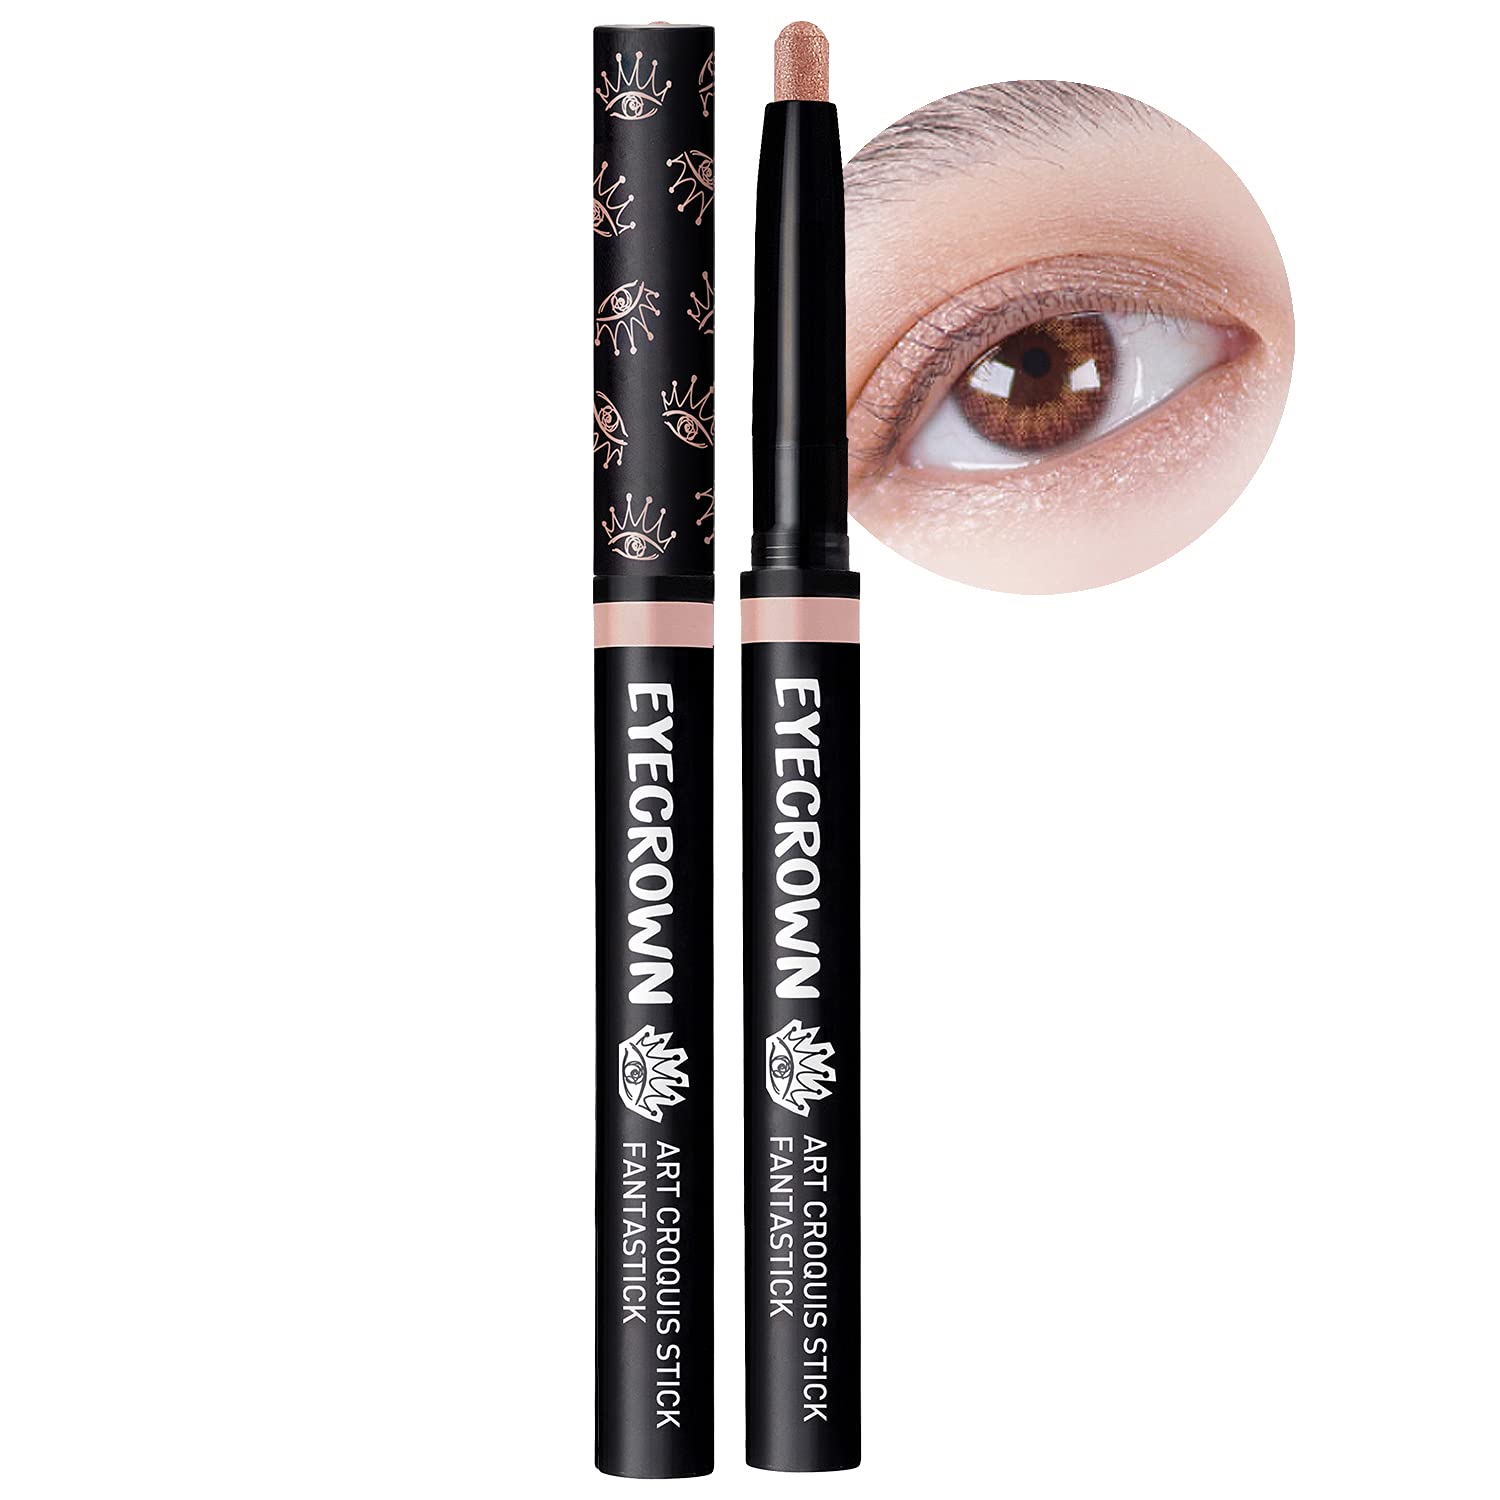 EYECROWN Art Croquis Stick Fantastick Shimmer Glitter Long Lasting Eyeshadow 0.5g (02 BABY STICK) - Quick Fixing Cream Eyeshadow Pencil, Easy to Blend, Waterproof, Crease-Proof